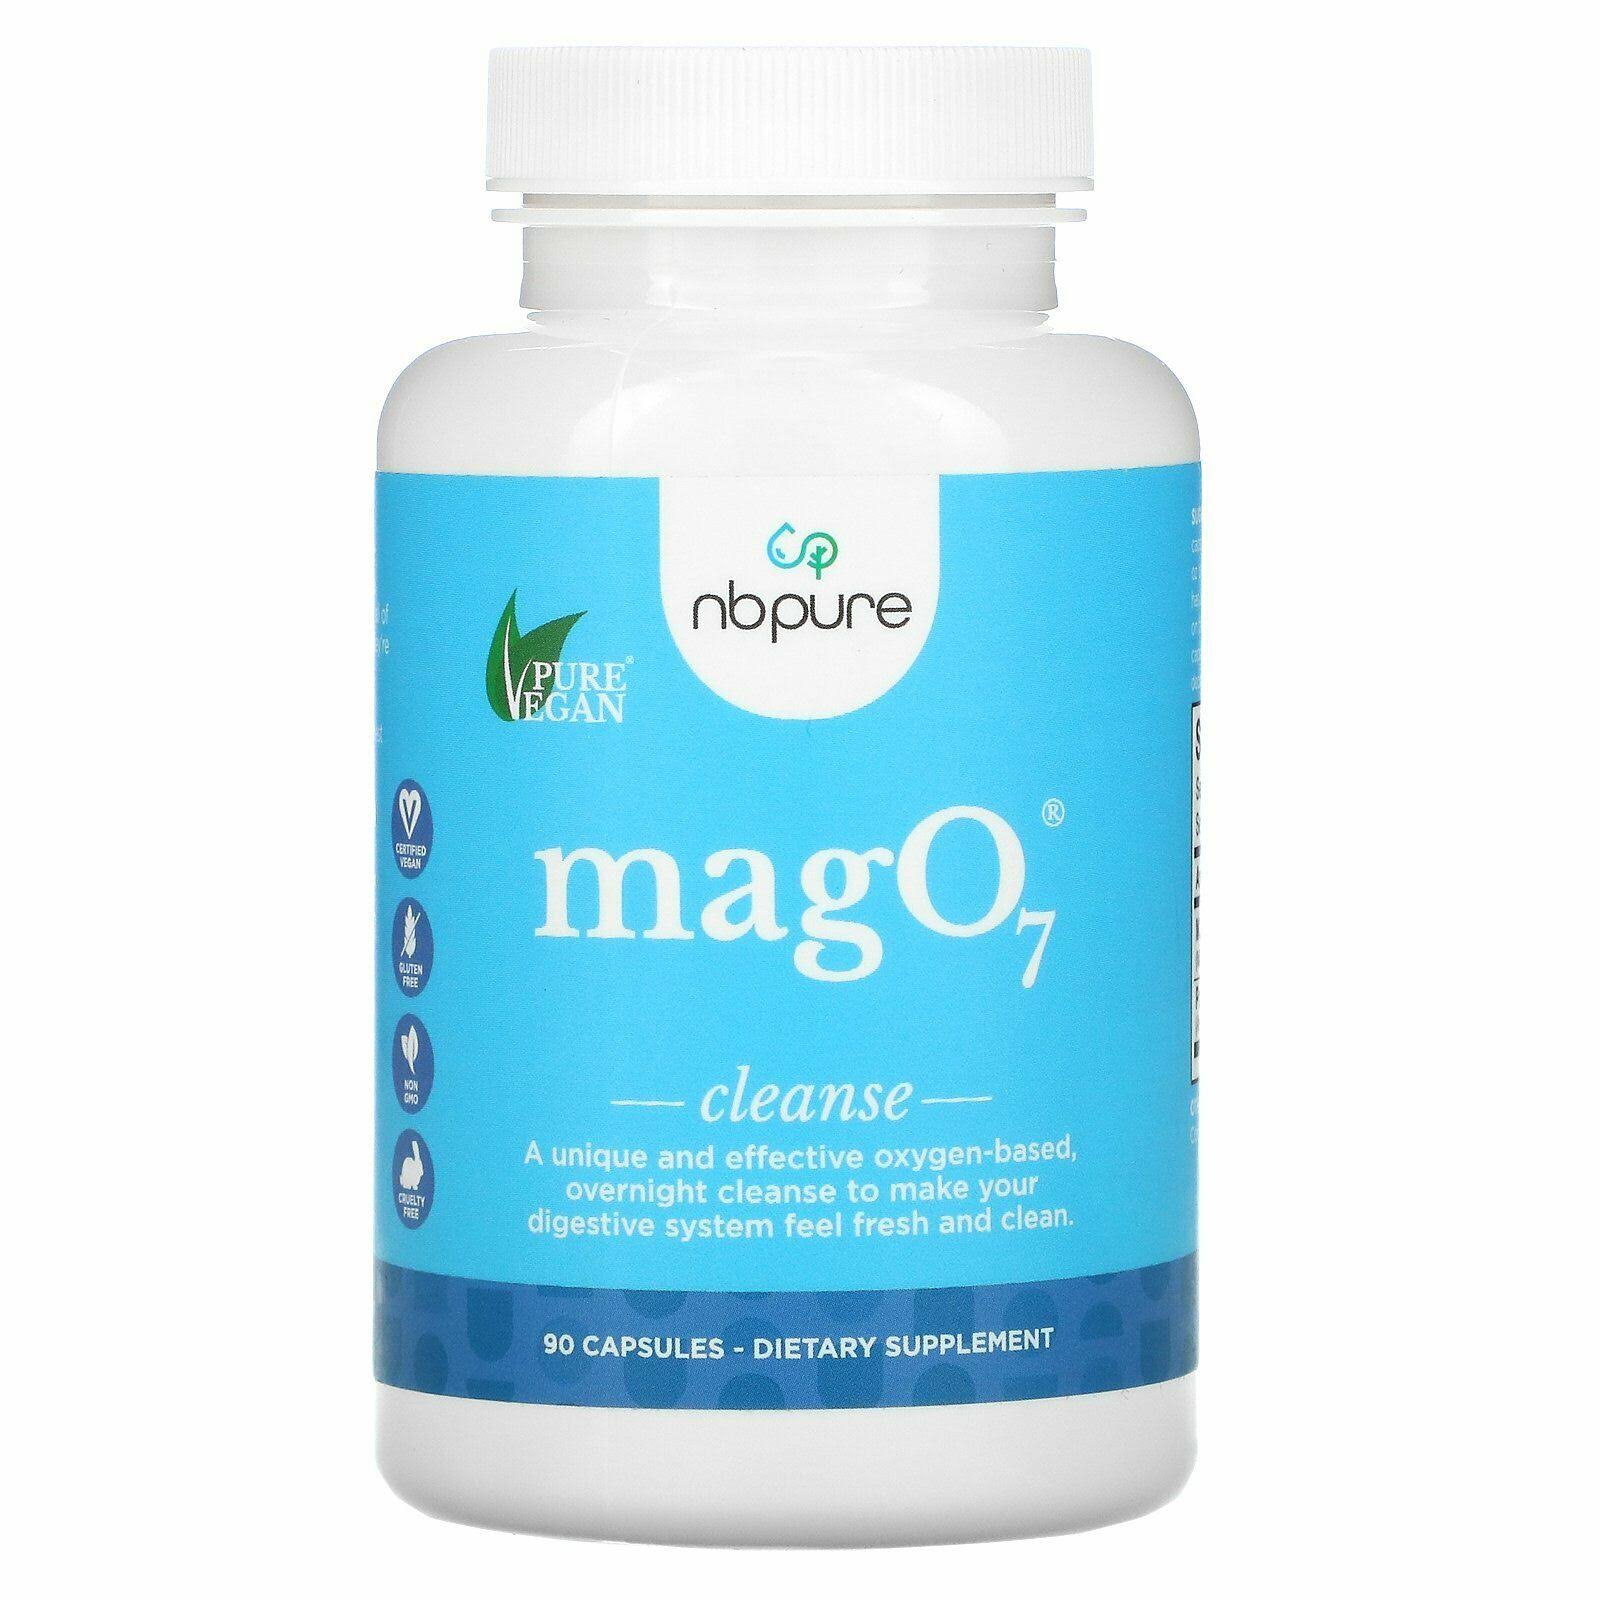 Aerobic Life MagO7 Oxygen Digestive System Cleanser - 90 Caps